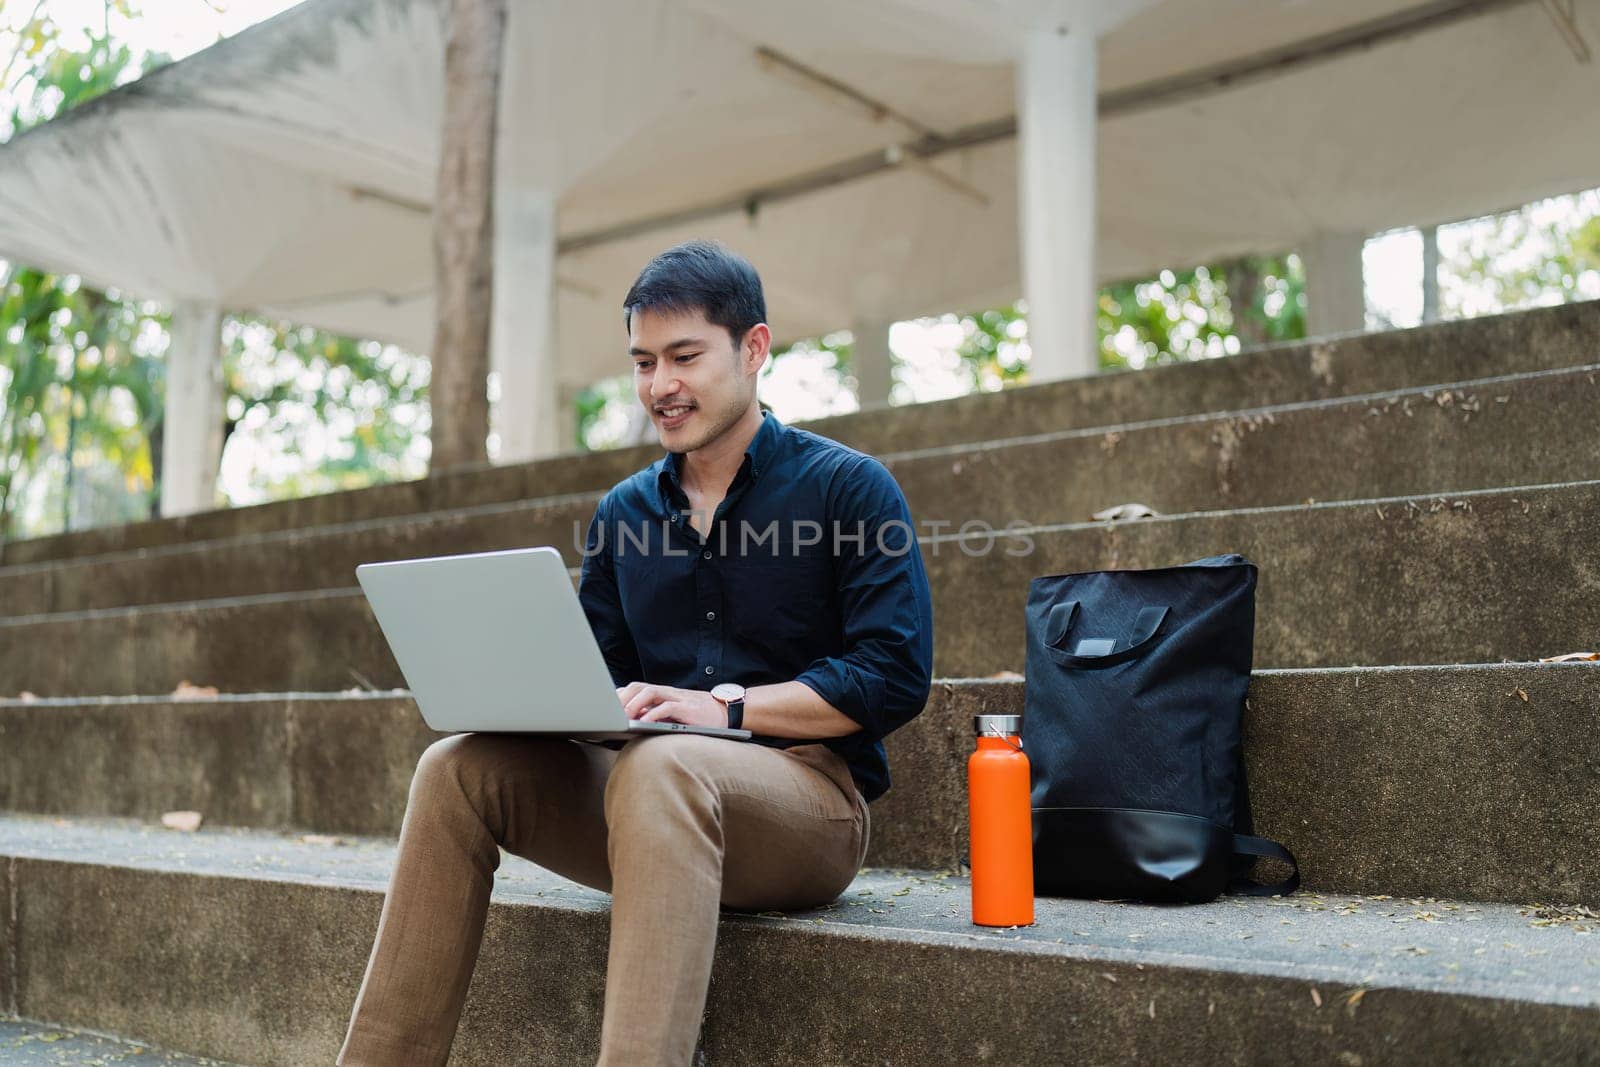 business man sitting on bench and working remotely on project with laptop.